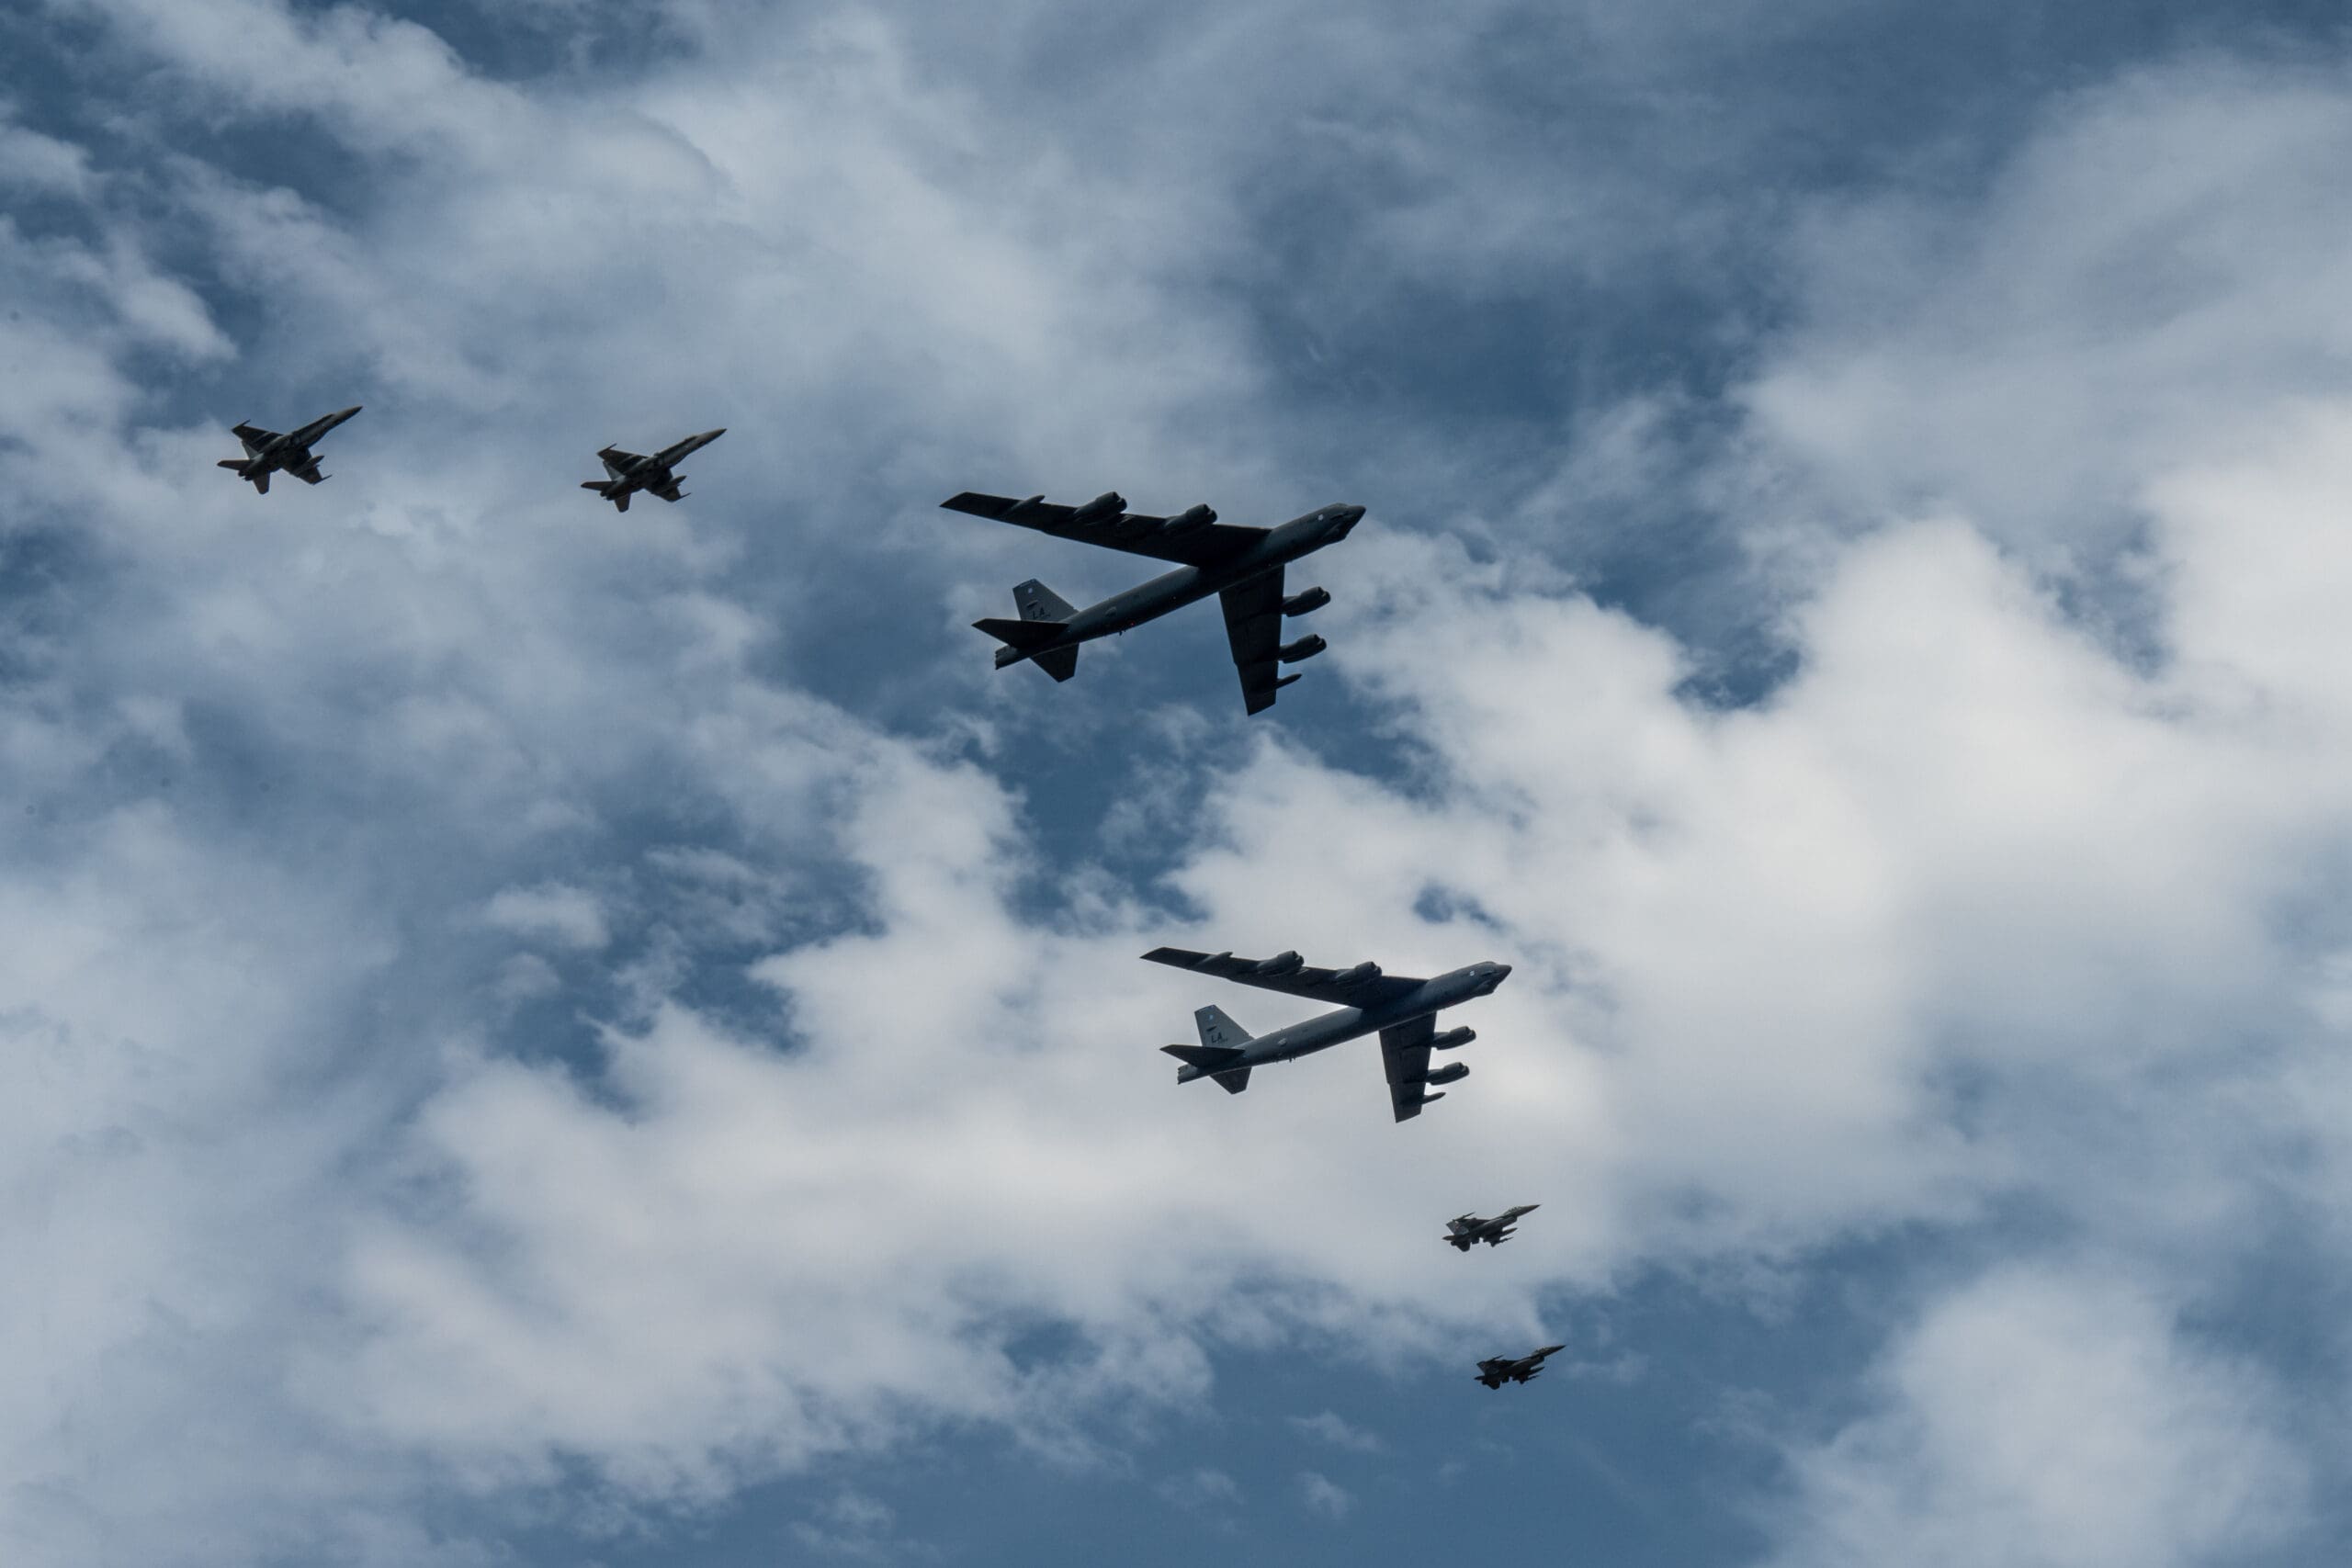 Two US Air Force B-52H bombers arrive in Romania after being intercepted by Russian fighters.